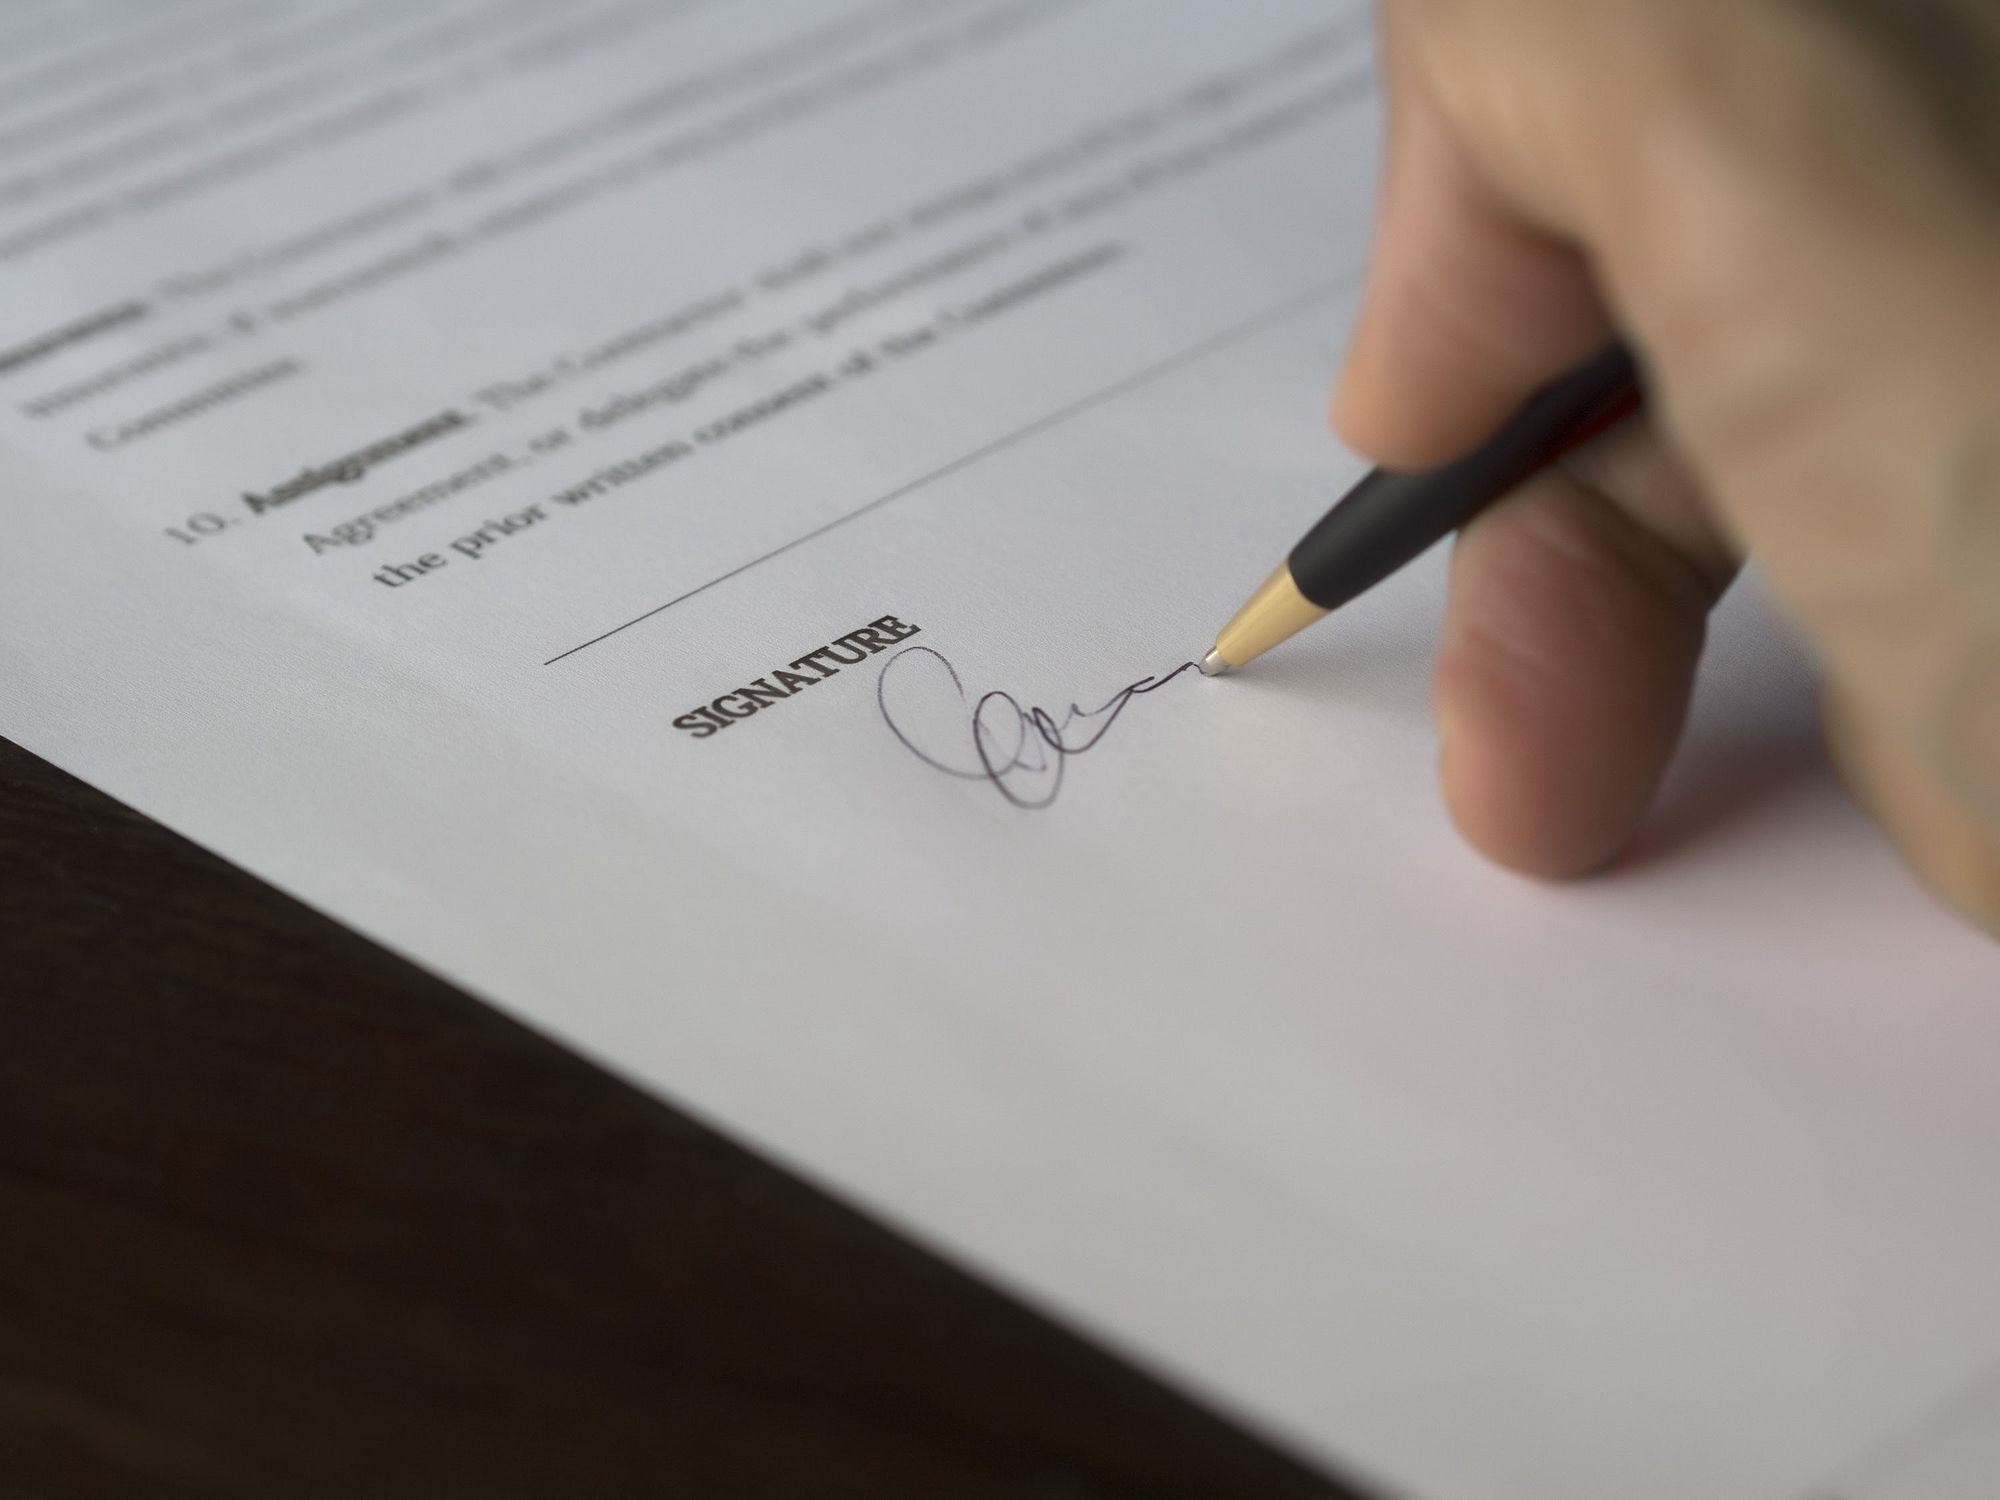 Automate, personalize your signature: uLaw tech update March 2020